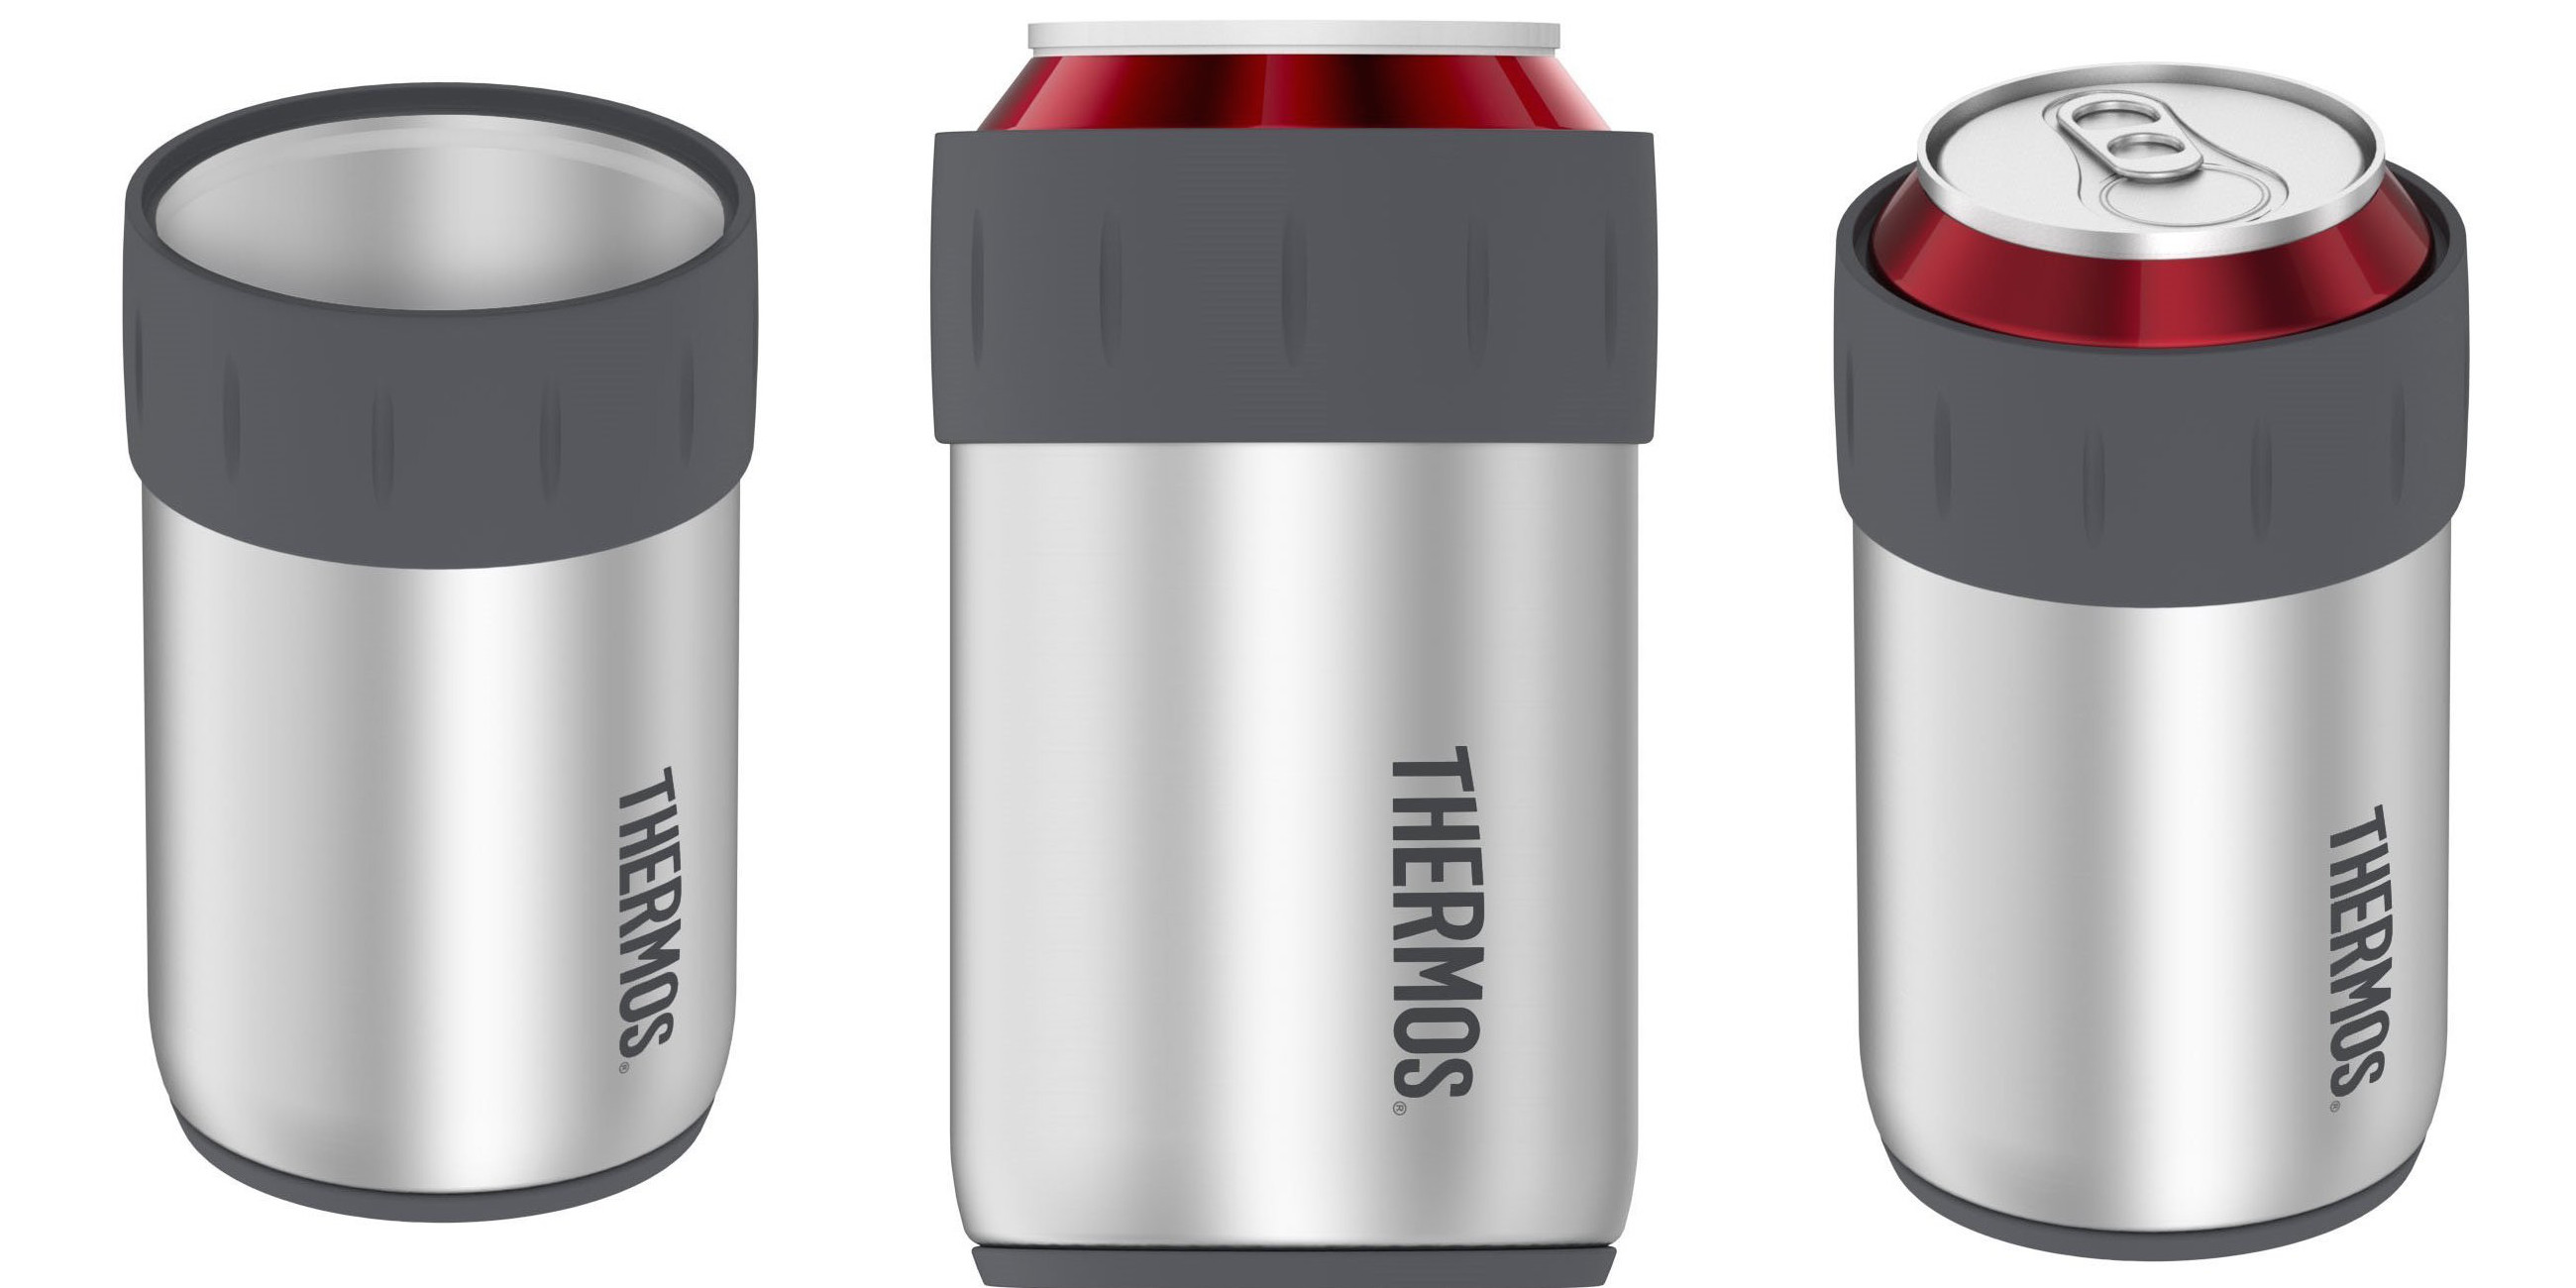 https://9to5toys.com/wp-content/uploads/sites/5/2017/01/thermos-can-insulator-sale-01.jpg